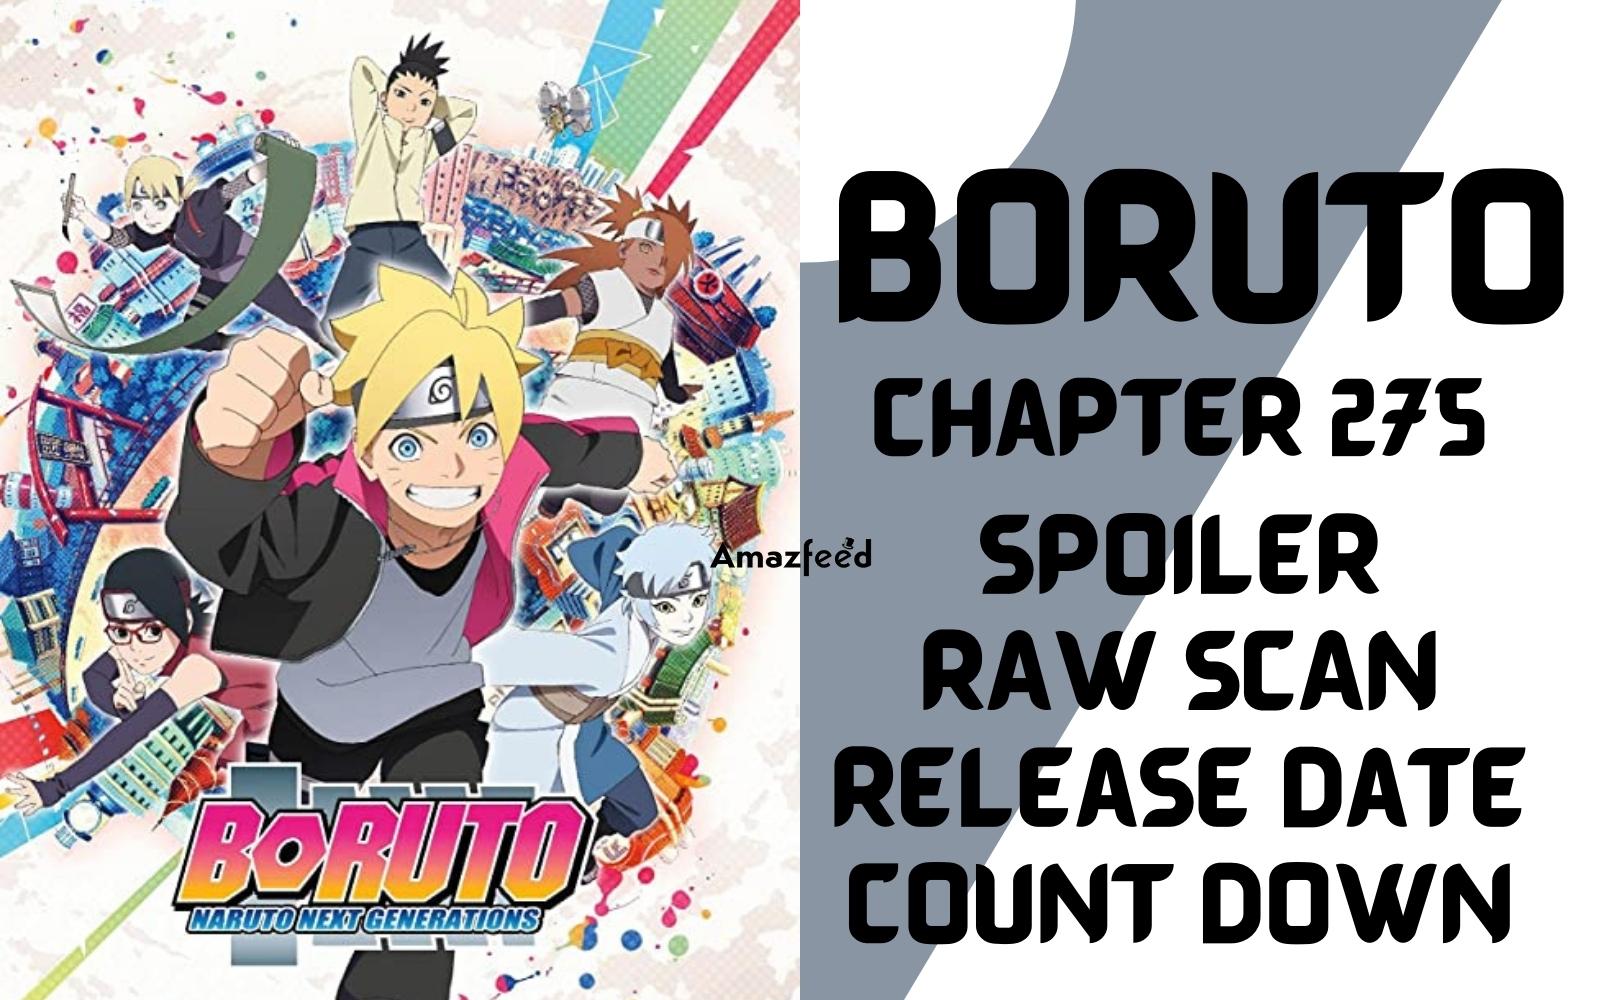 Boruto Episode 275 Spoiler, Release Date and Time, Countdown, Where to Watch, and More